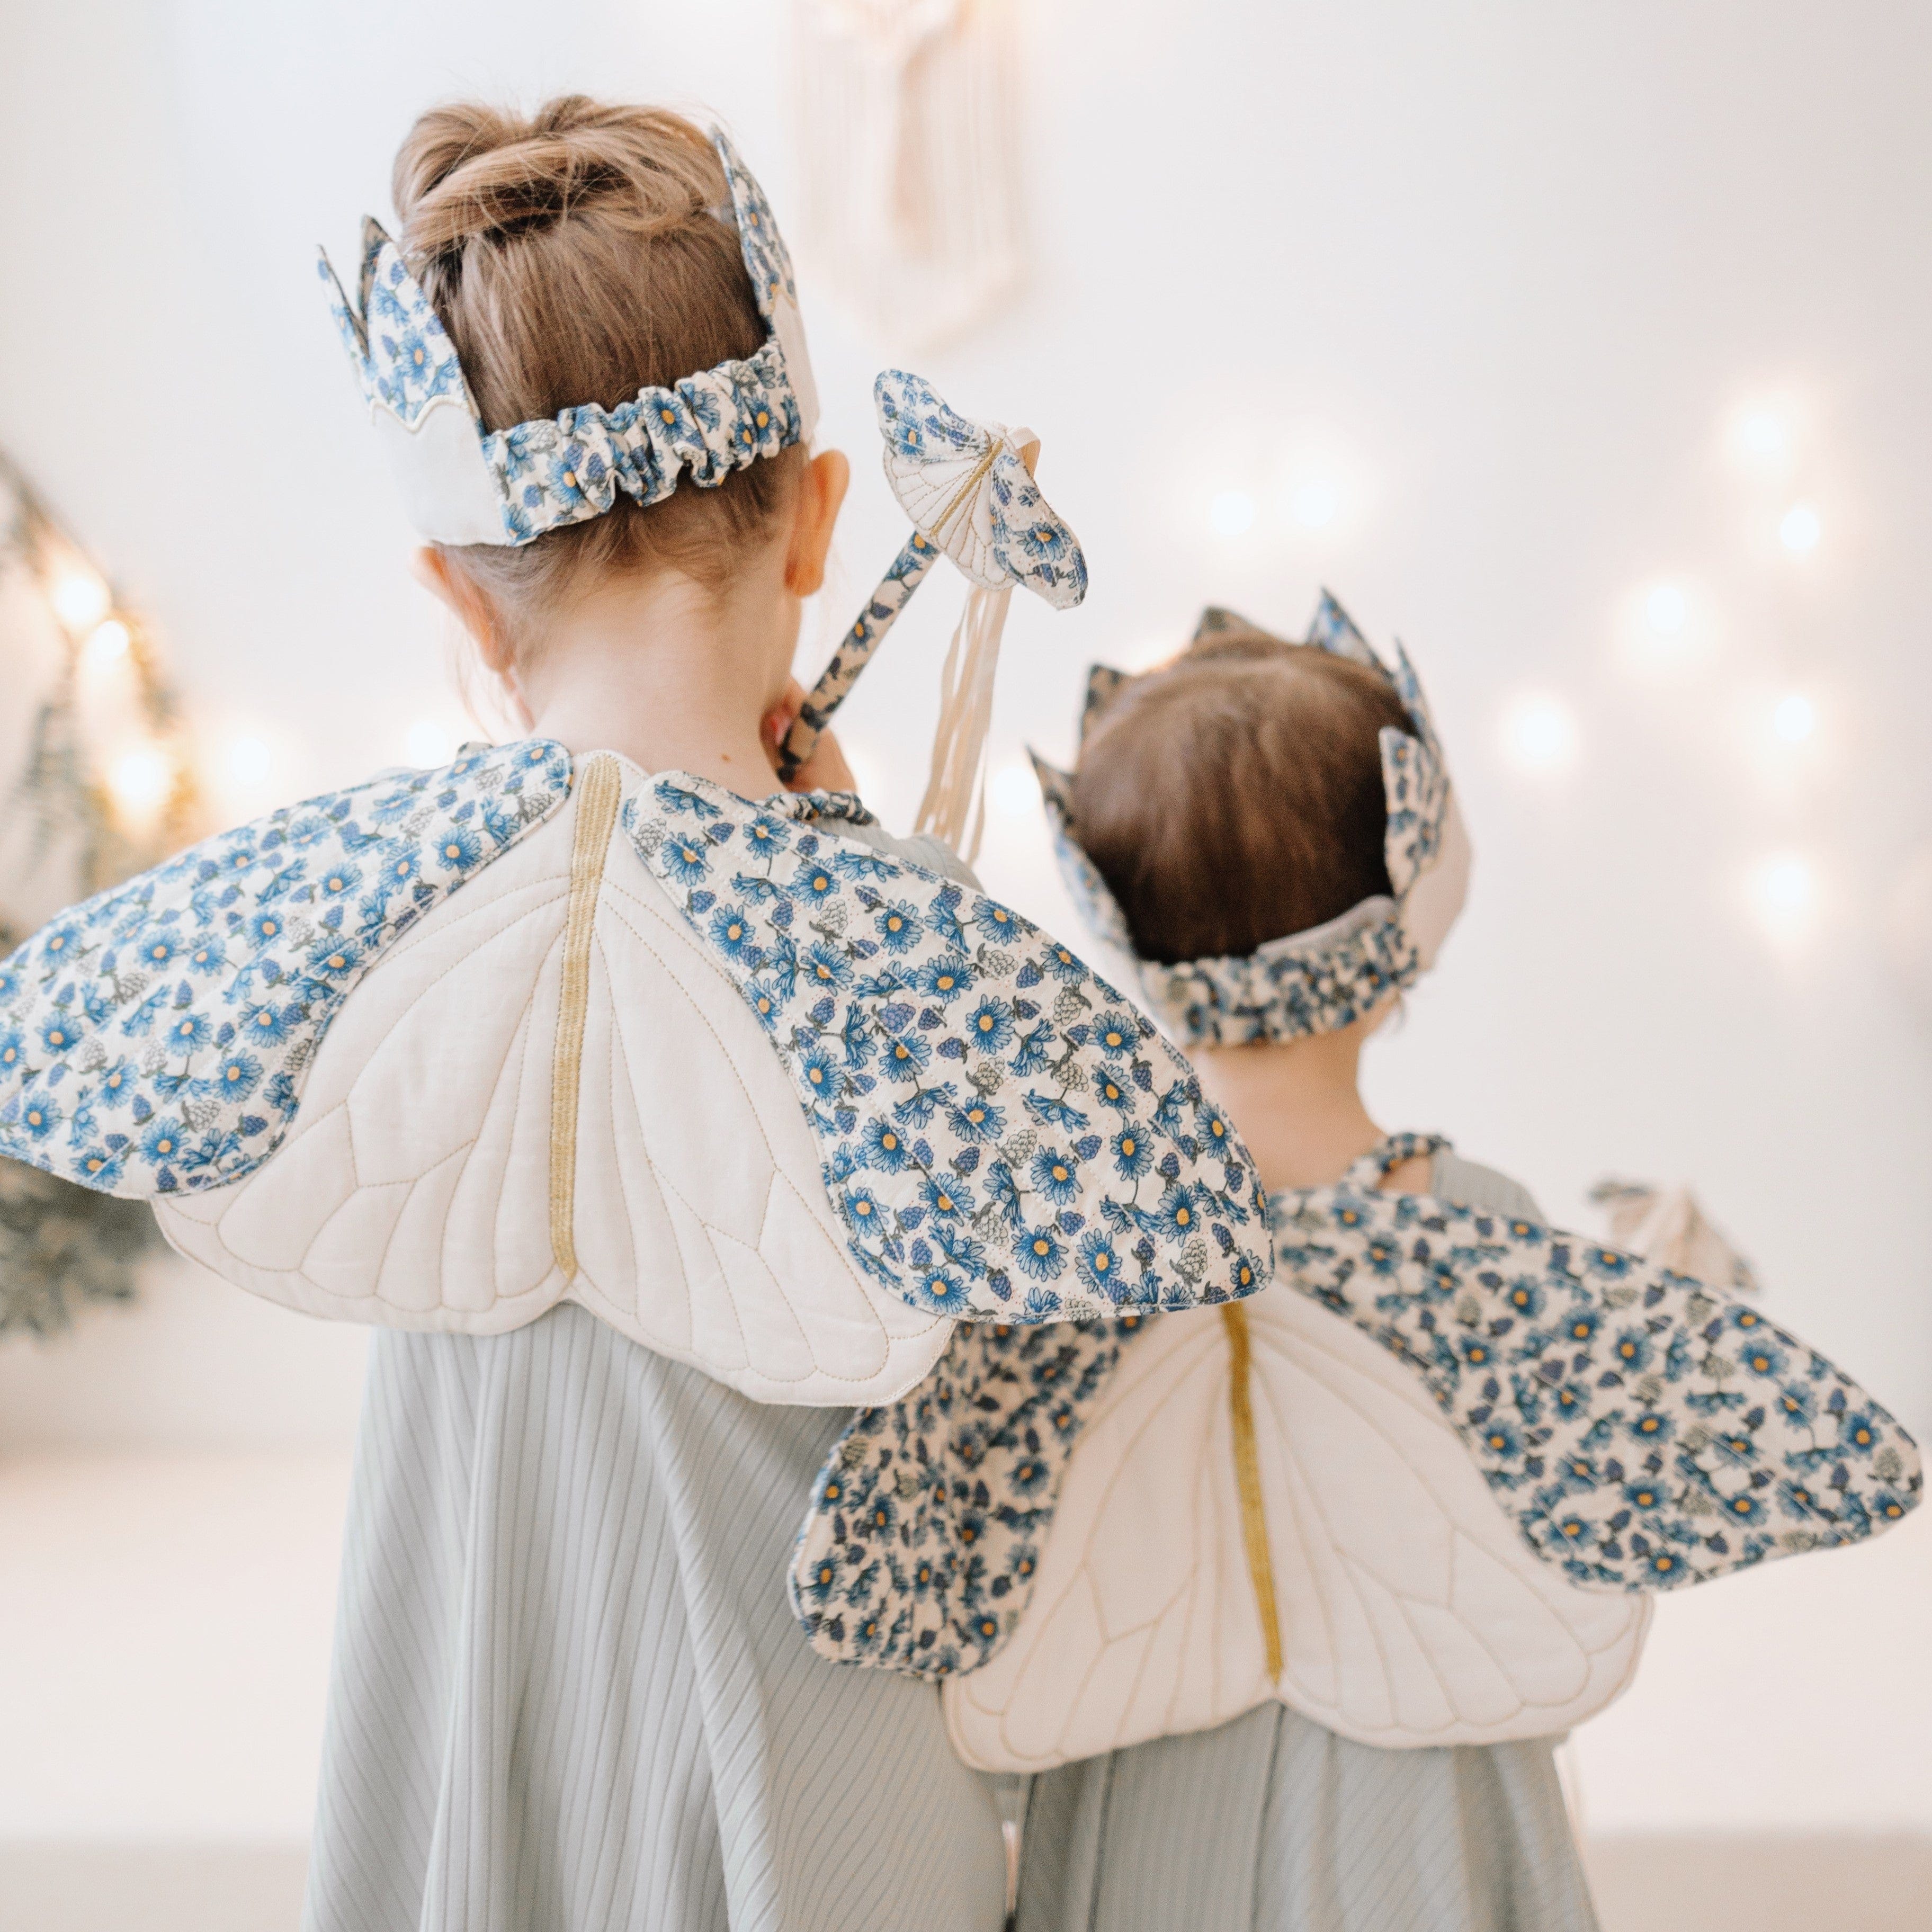 Butterfly Costume (100% Organic Cotton) by Konges Sløjd